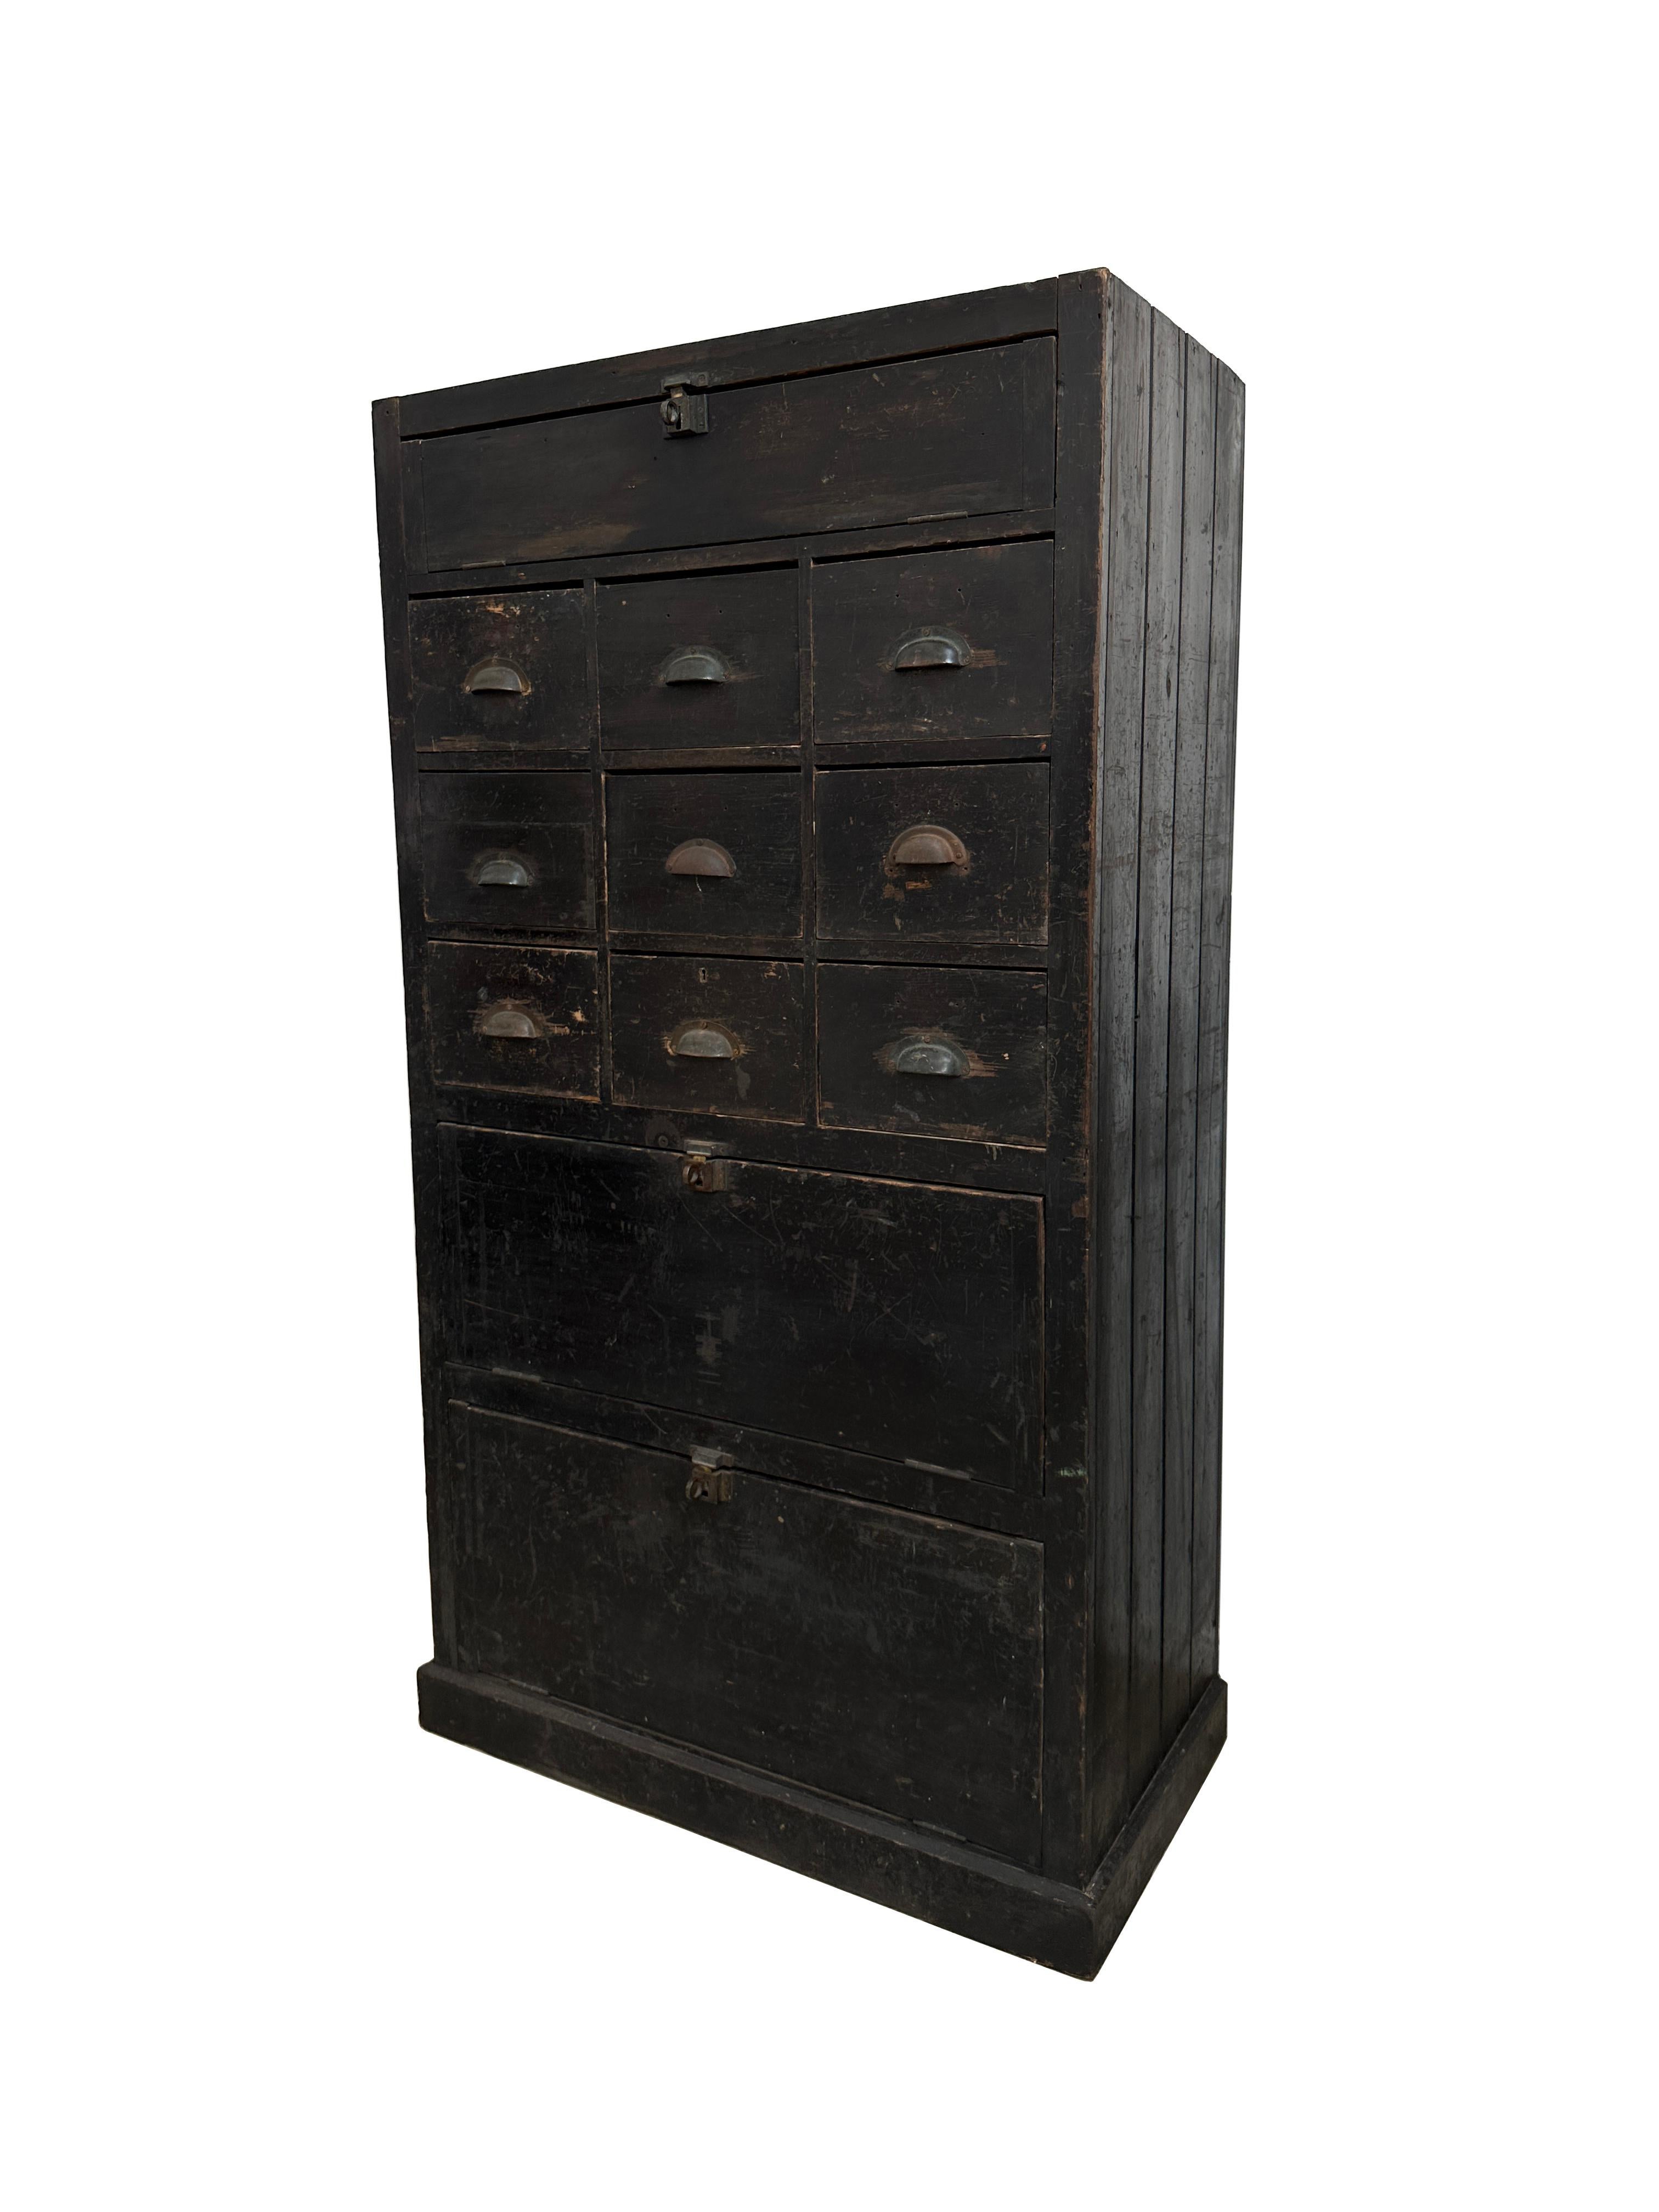 - A beautiful bank of industrial ebonised pine workshop drawers of large proportion, circa 1930.
- There are nine drawers in total, all tongue and groove in construction and across the middle section, and then three most unusual drop down drawers